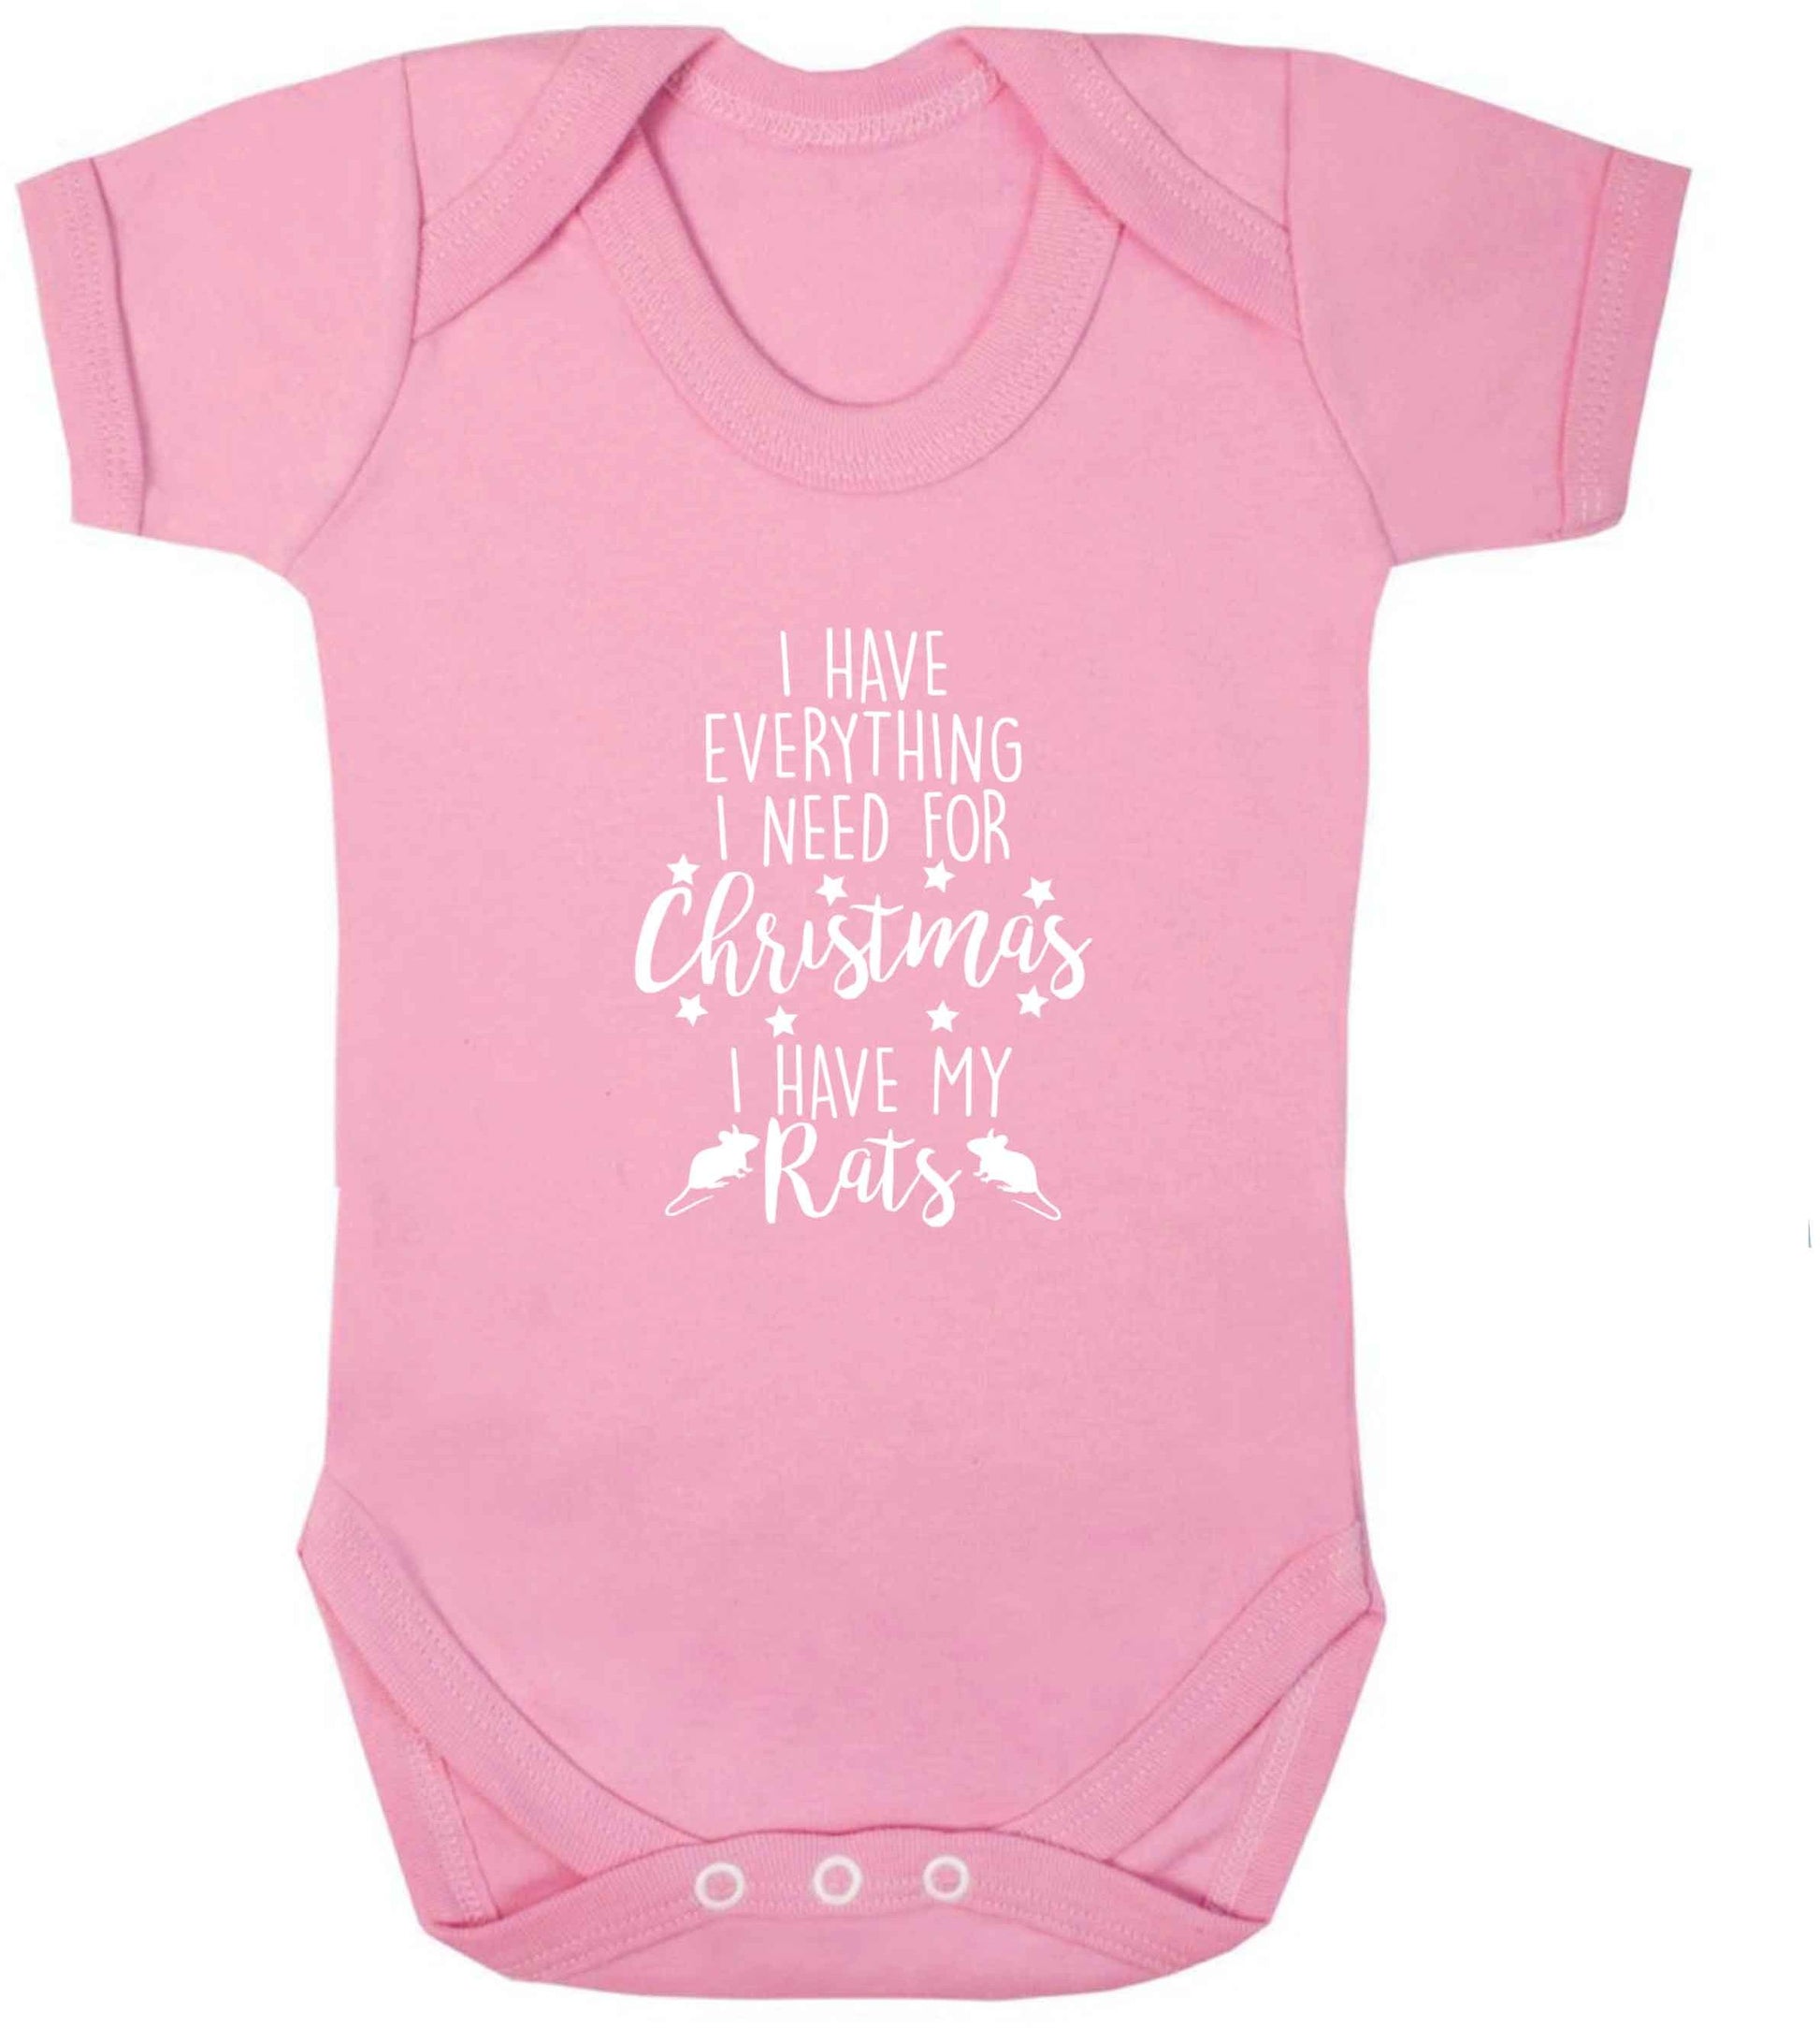 I have everything I need for Christmas I have my rats baby vest pale pink 18-24 months